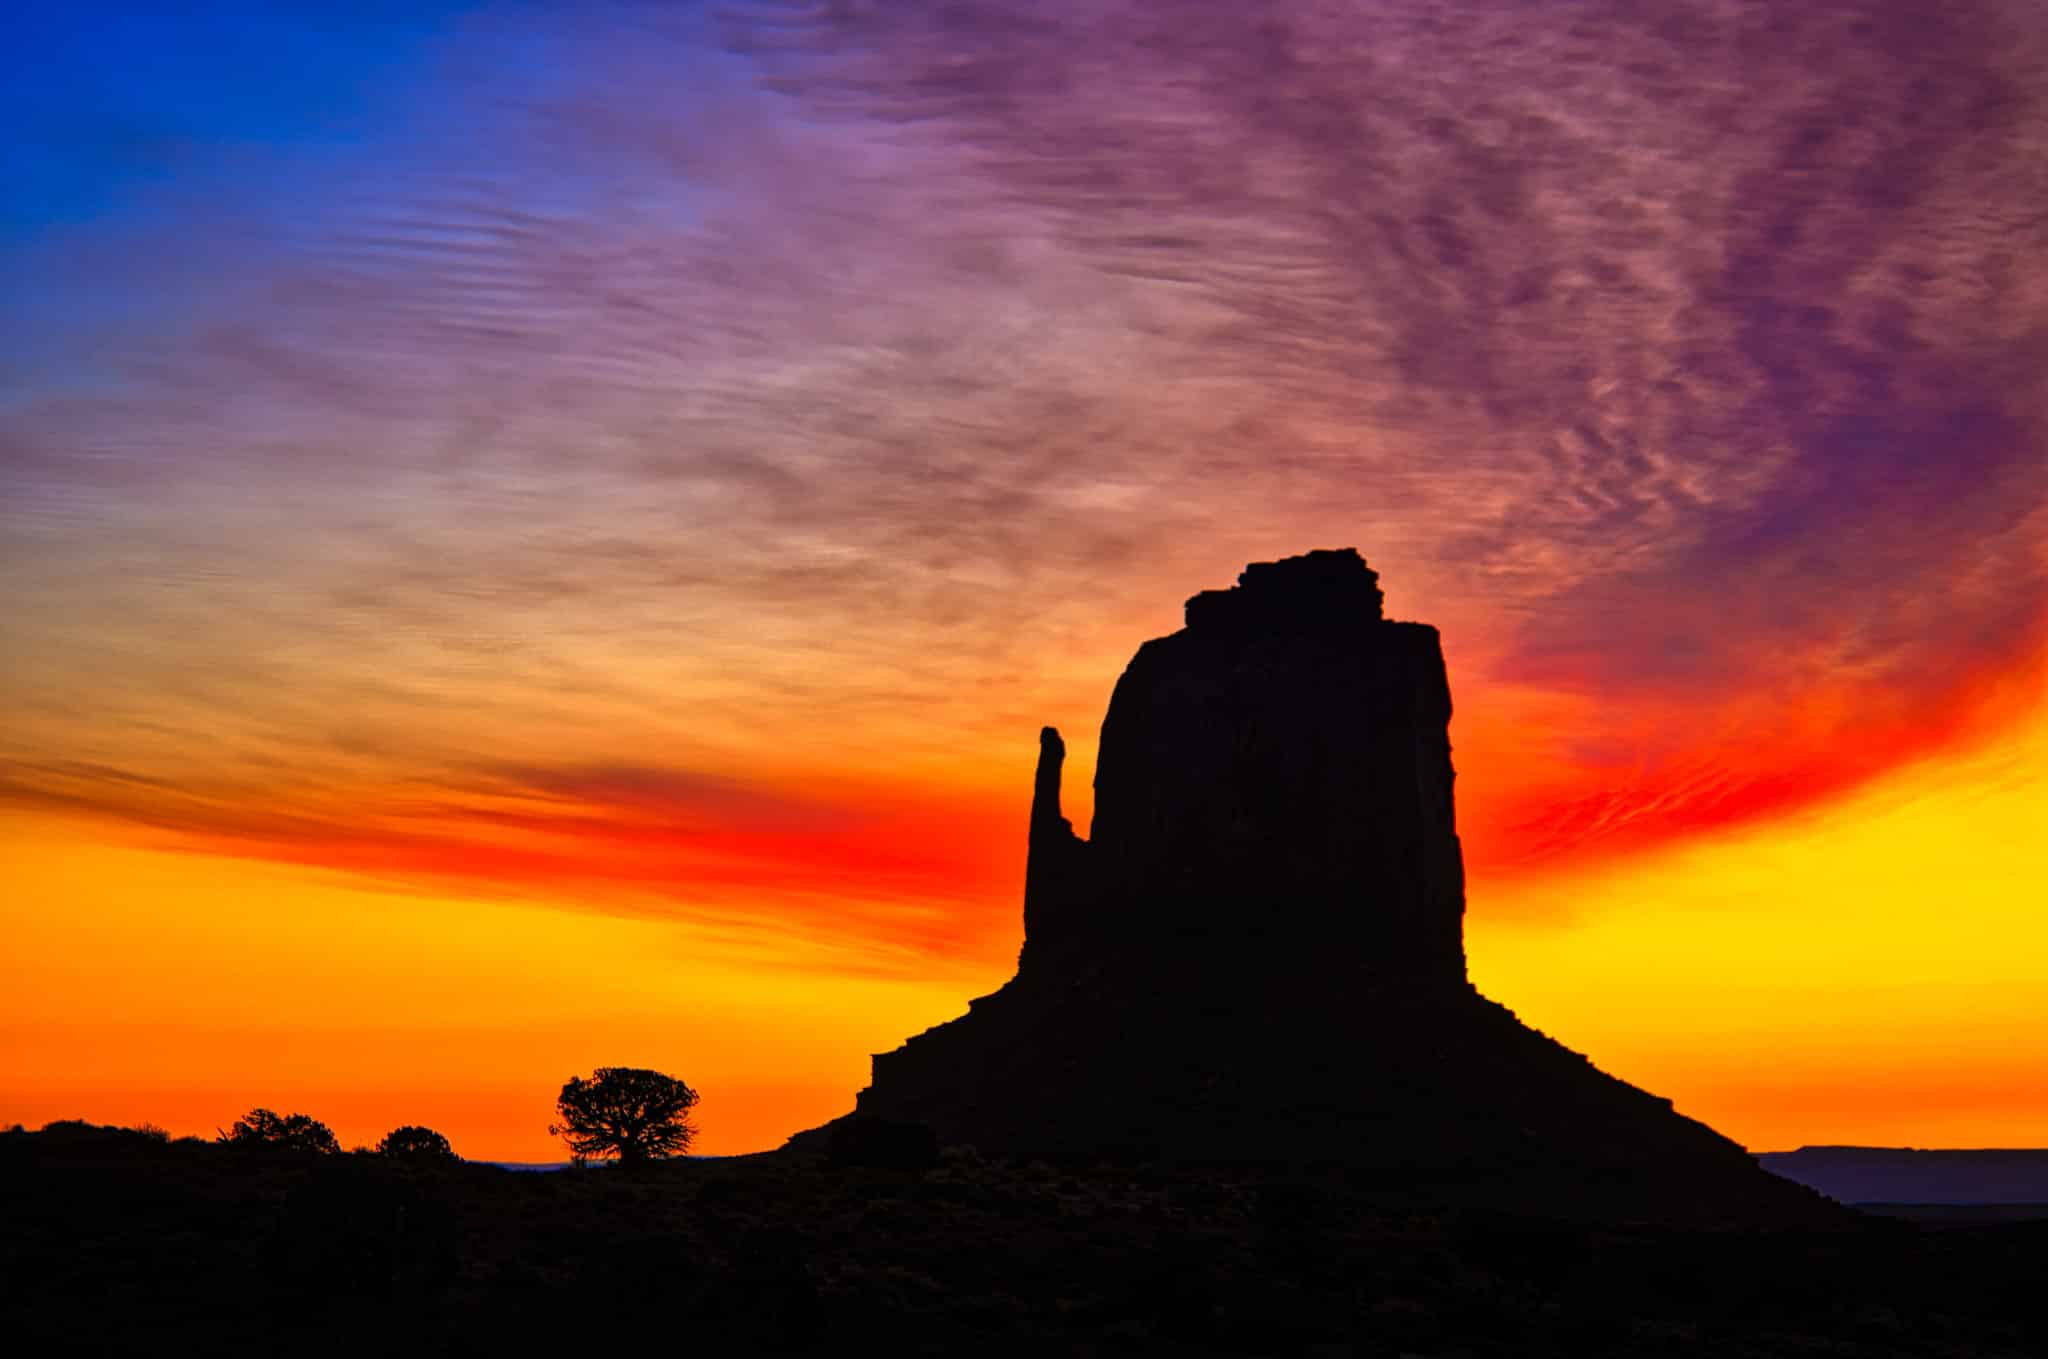 Dawn at near East Mitten in Monument Valley Navajo Tribal Park.